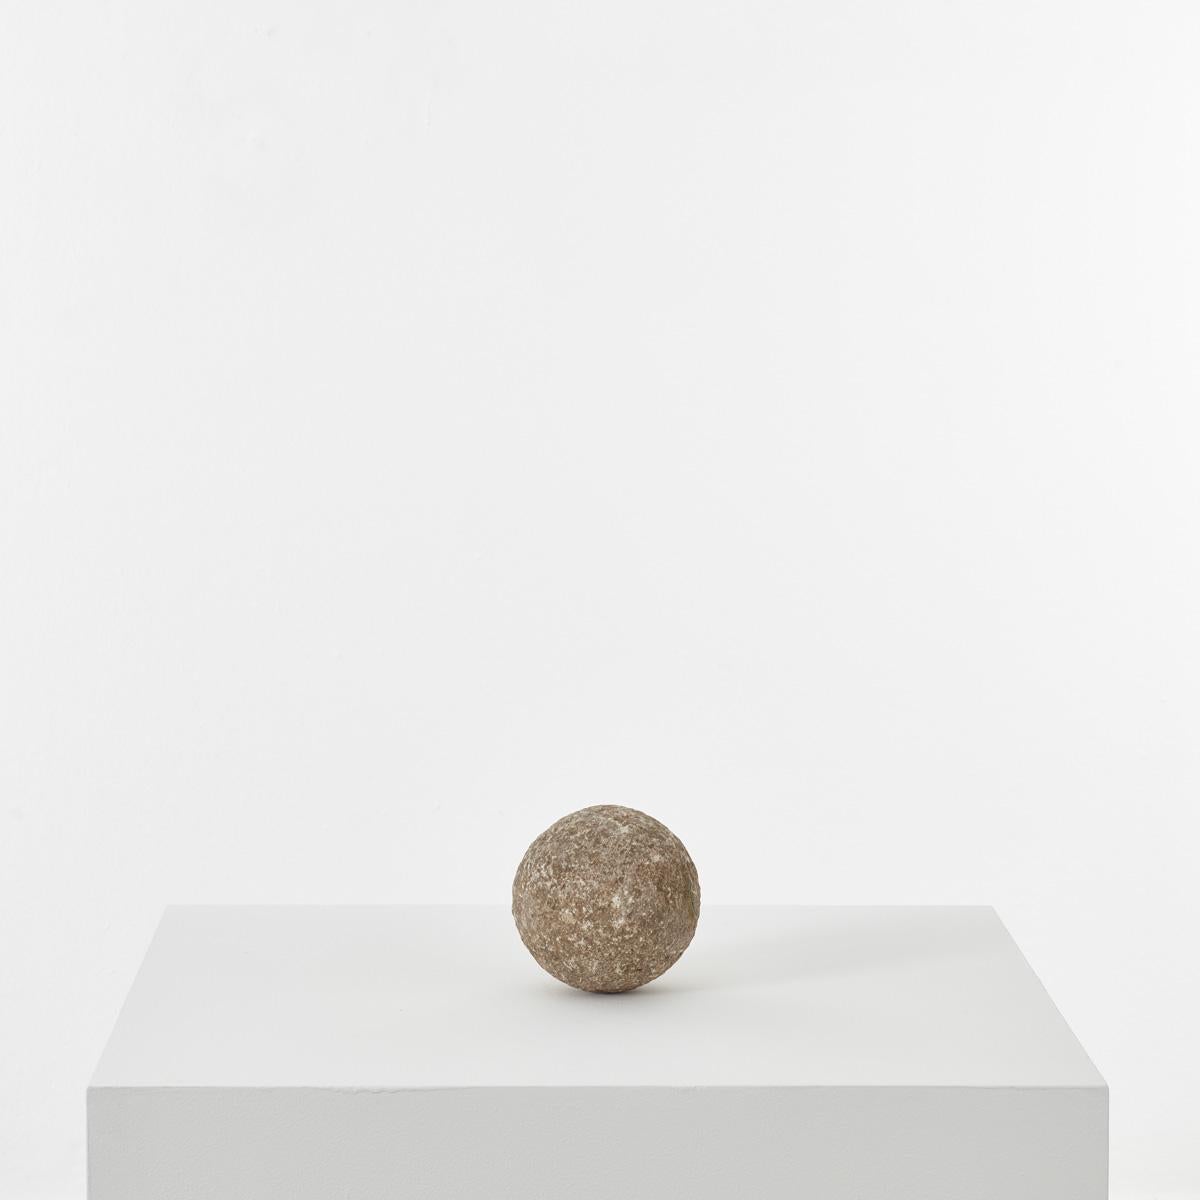 This old finial ball ornament had been carved from a single piece of Granite stone. The surface across its spherical form shows a pleasing texture that is rough to the touch. In good structural condition, with signs of past use.